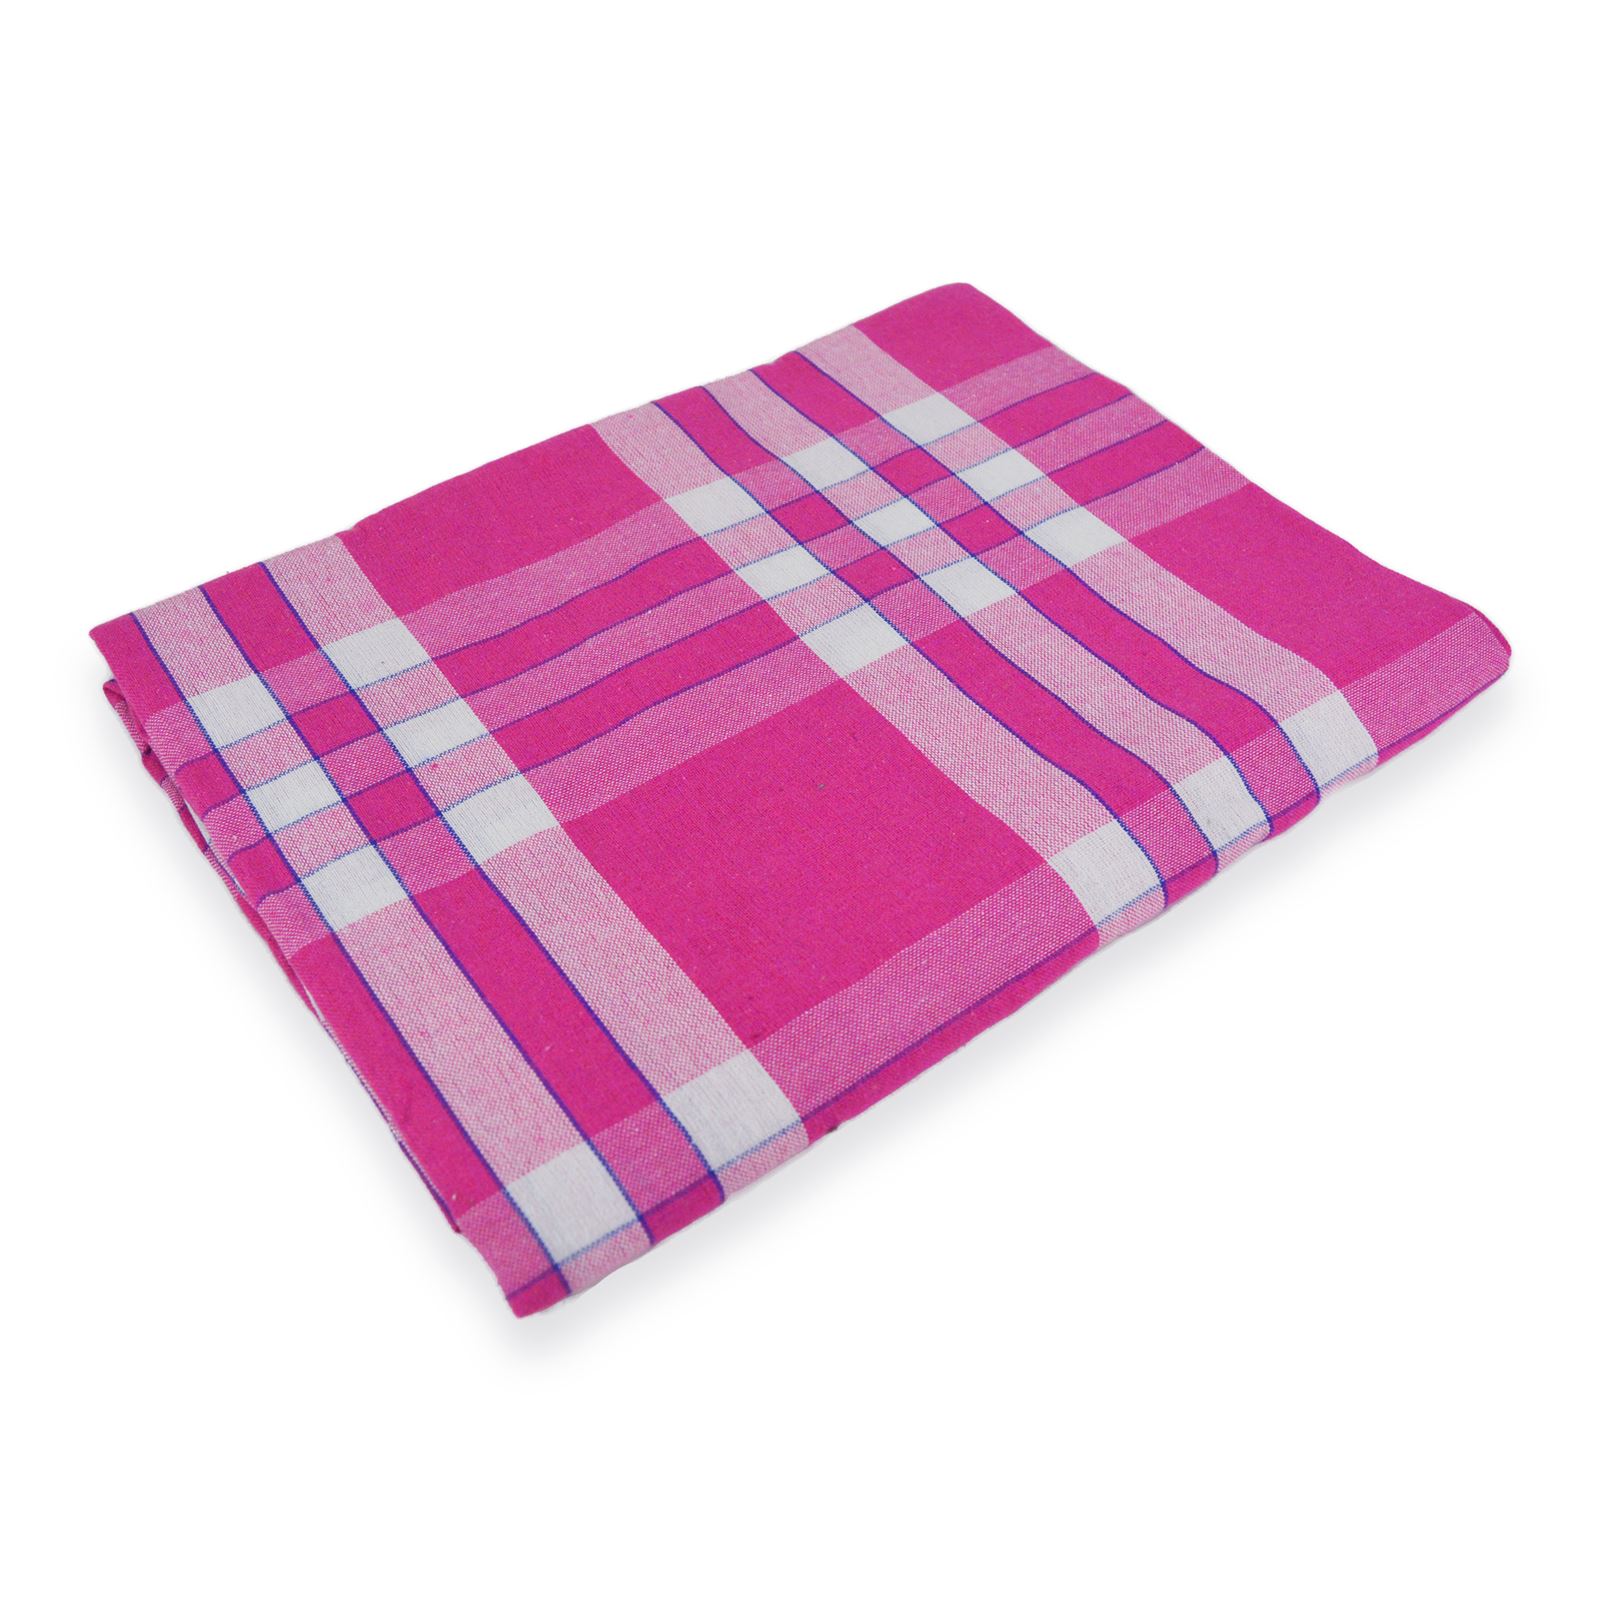 Pink Handloom Cotton Bed Sheets 54x80 (Inches) Checkered Style for Double, Single Beds